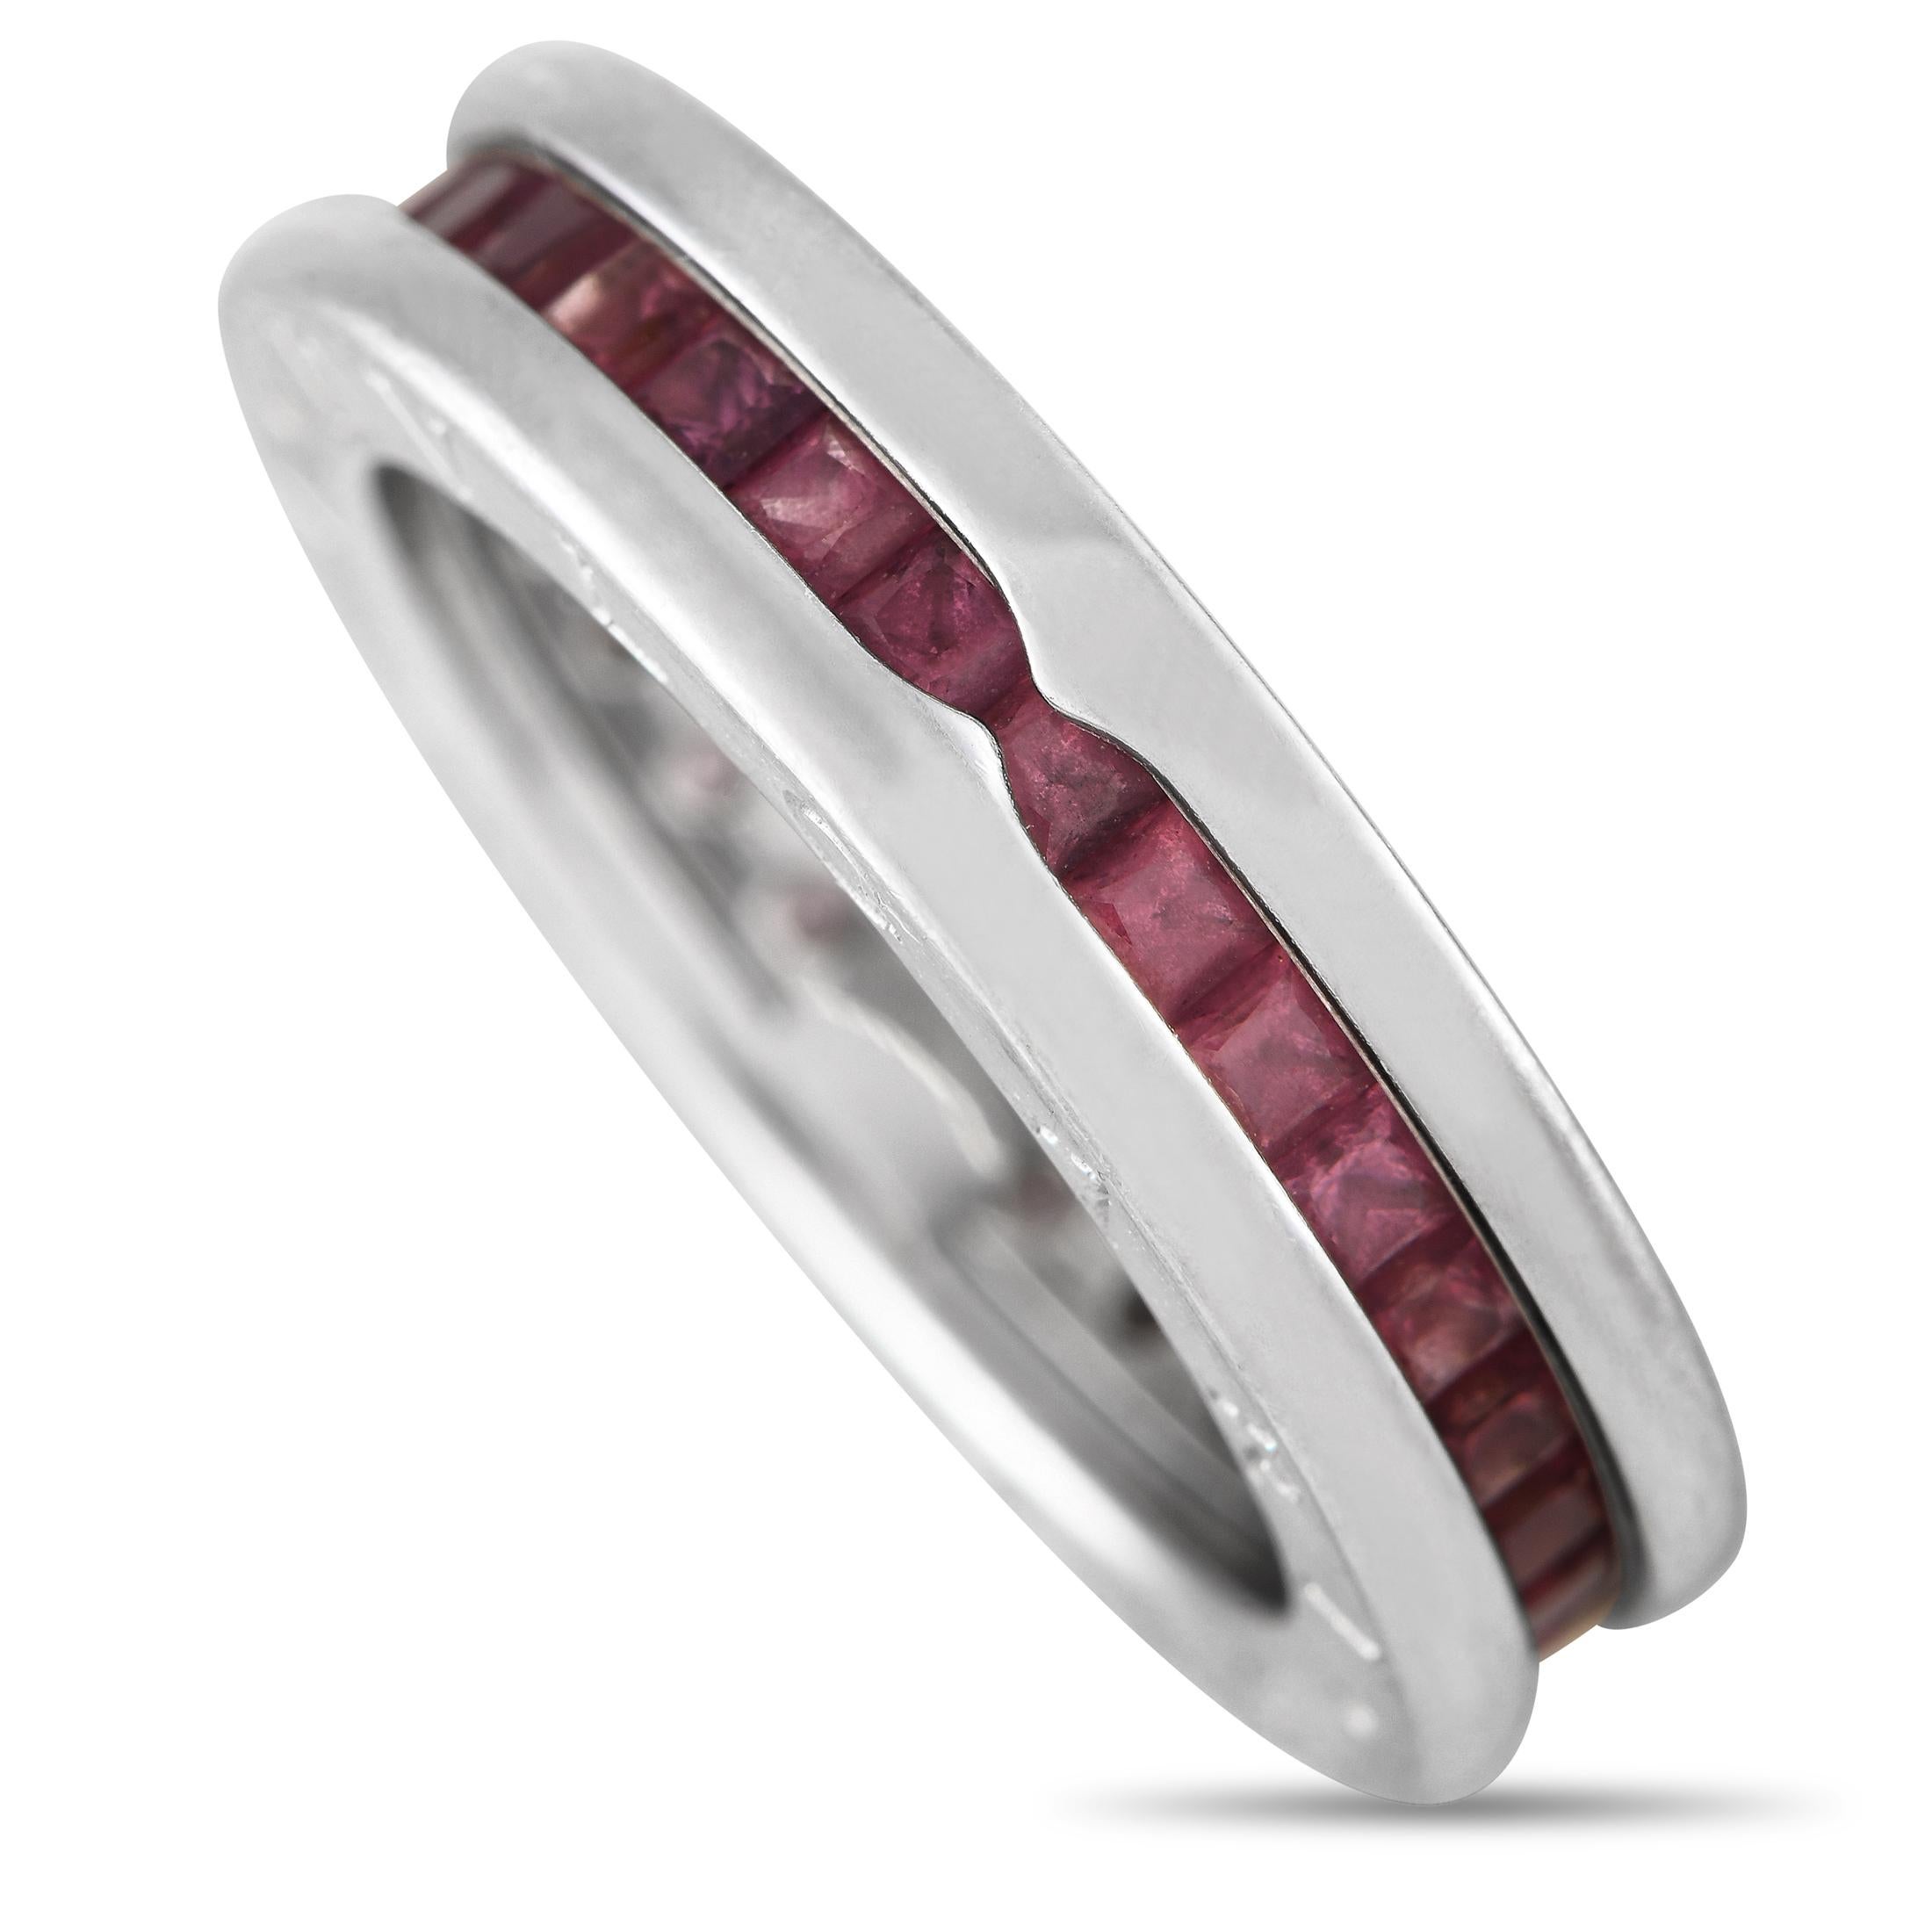 Bvlgari B.zero1 18K White Gold and Pink Tourmaline Ring BV29-012524 In Excellent Condition For Sale In Southampton, PA